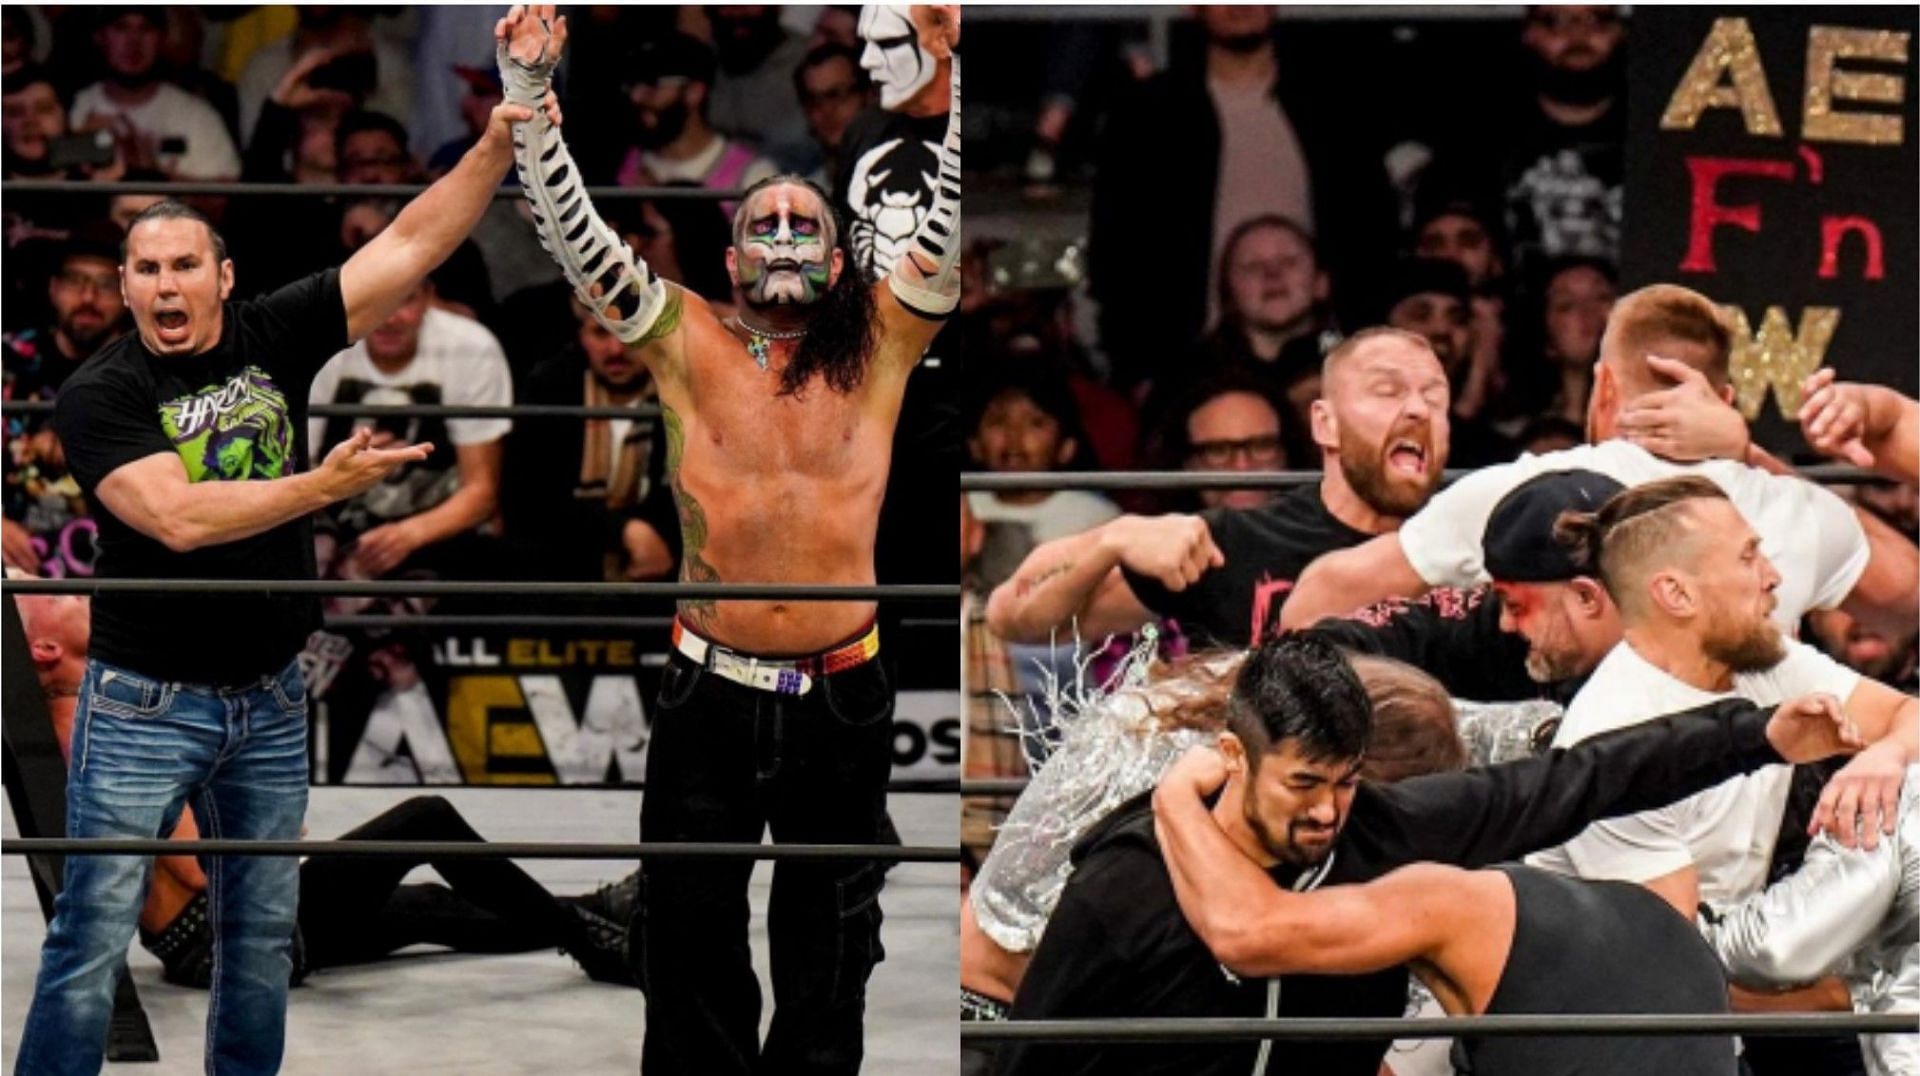 What went down on AEW Dynamite this week?